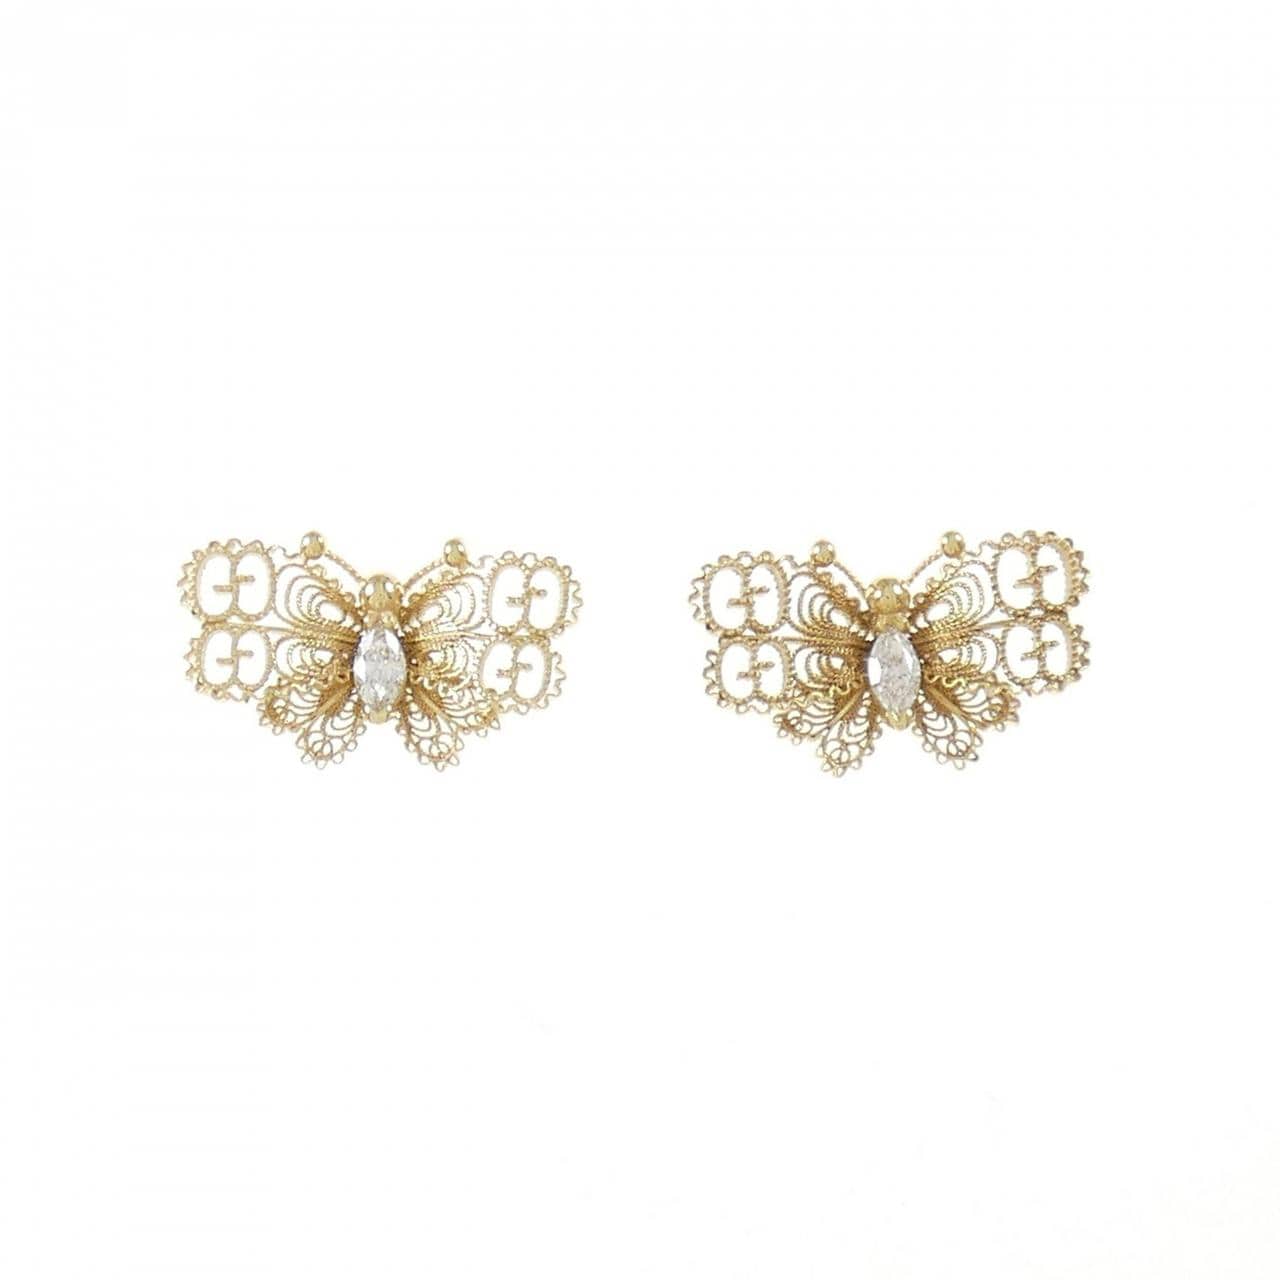 Update more than 151 gucci earrings butterfly